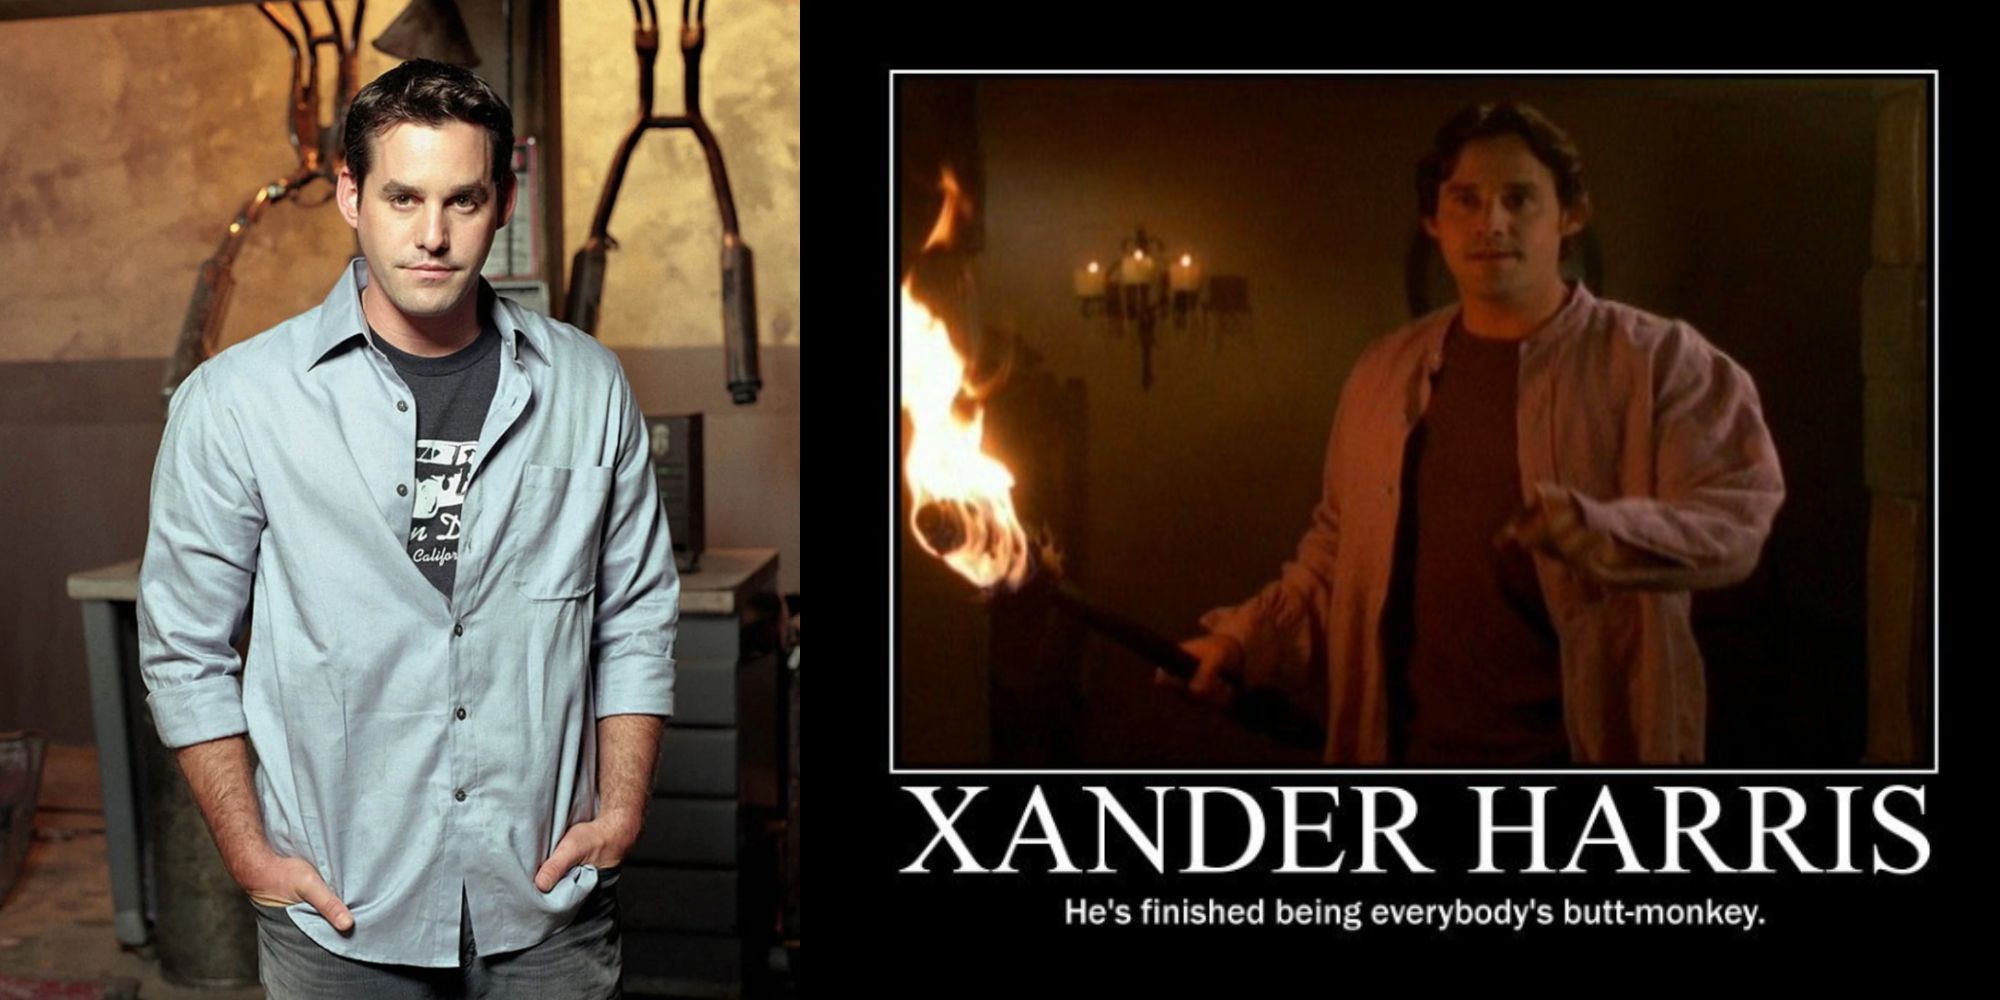 Xander Harris stands up for himself